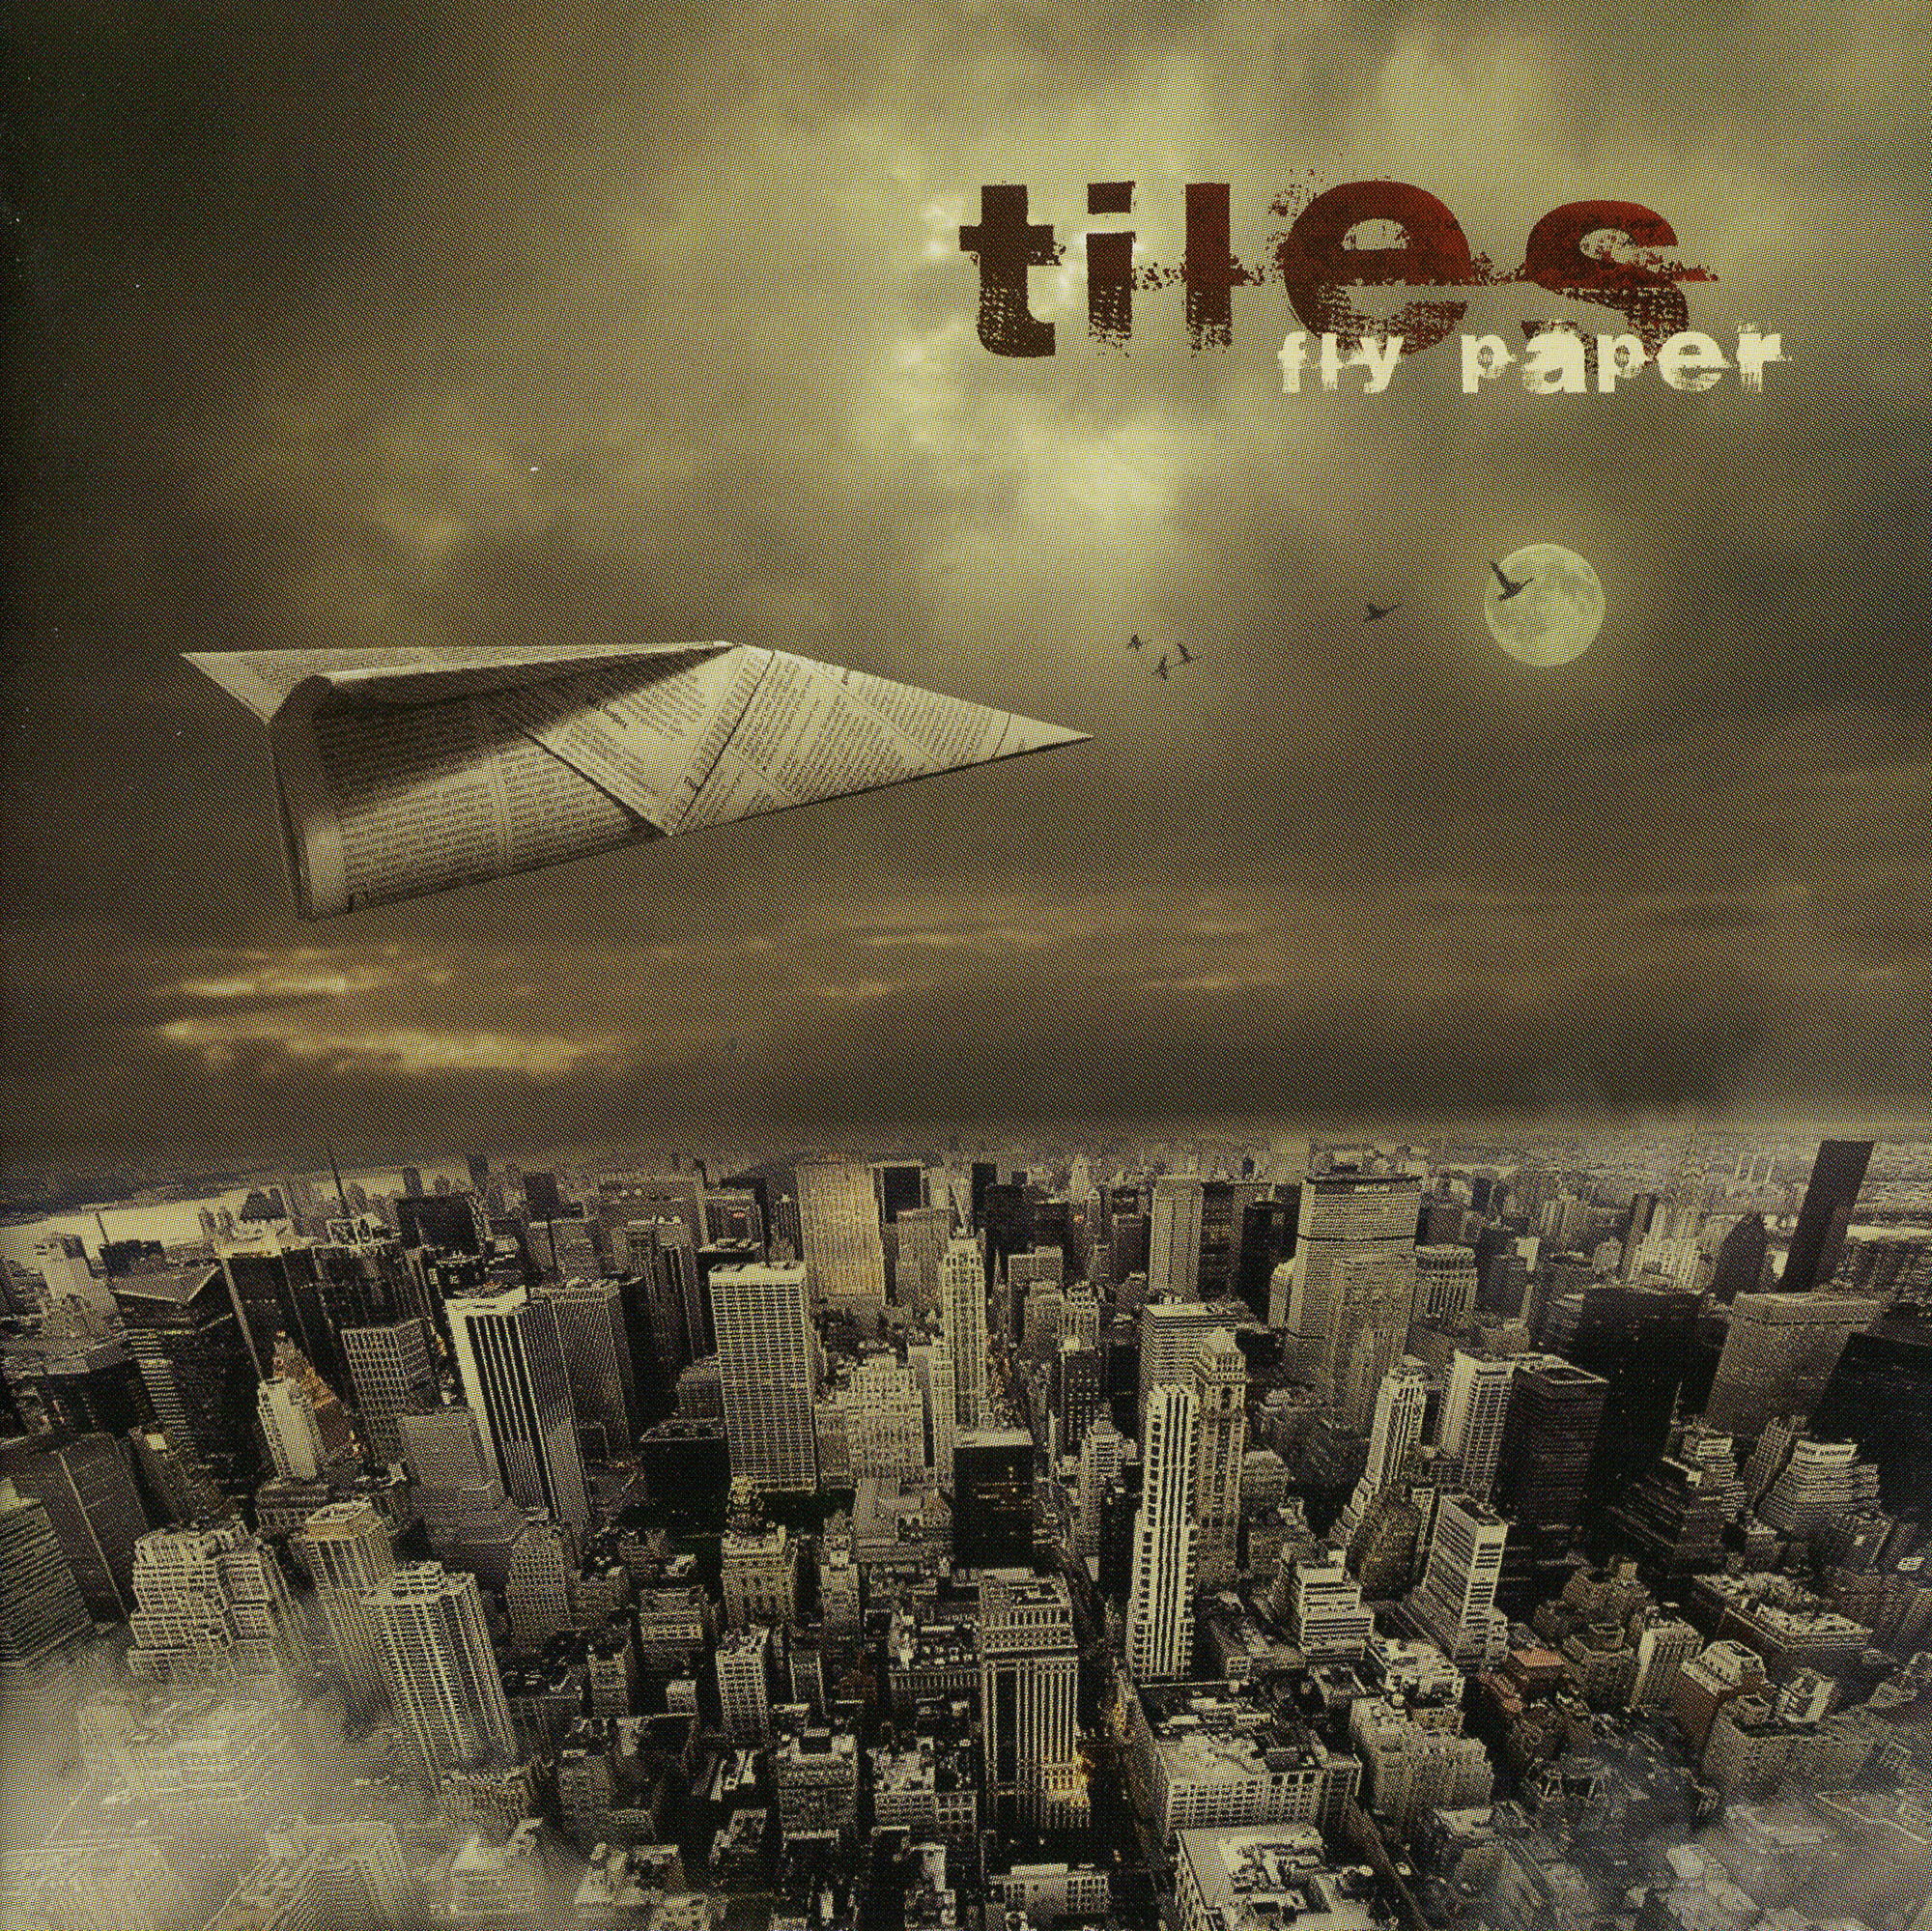 Fly Paper (2008)